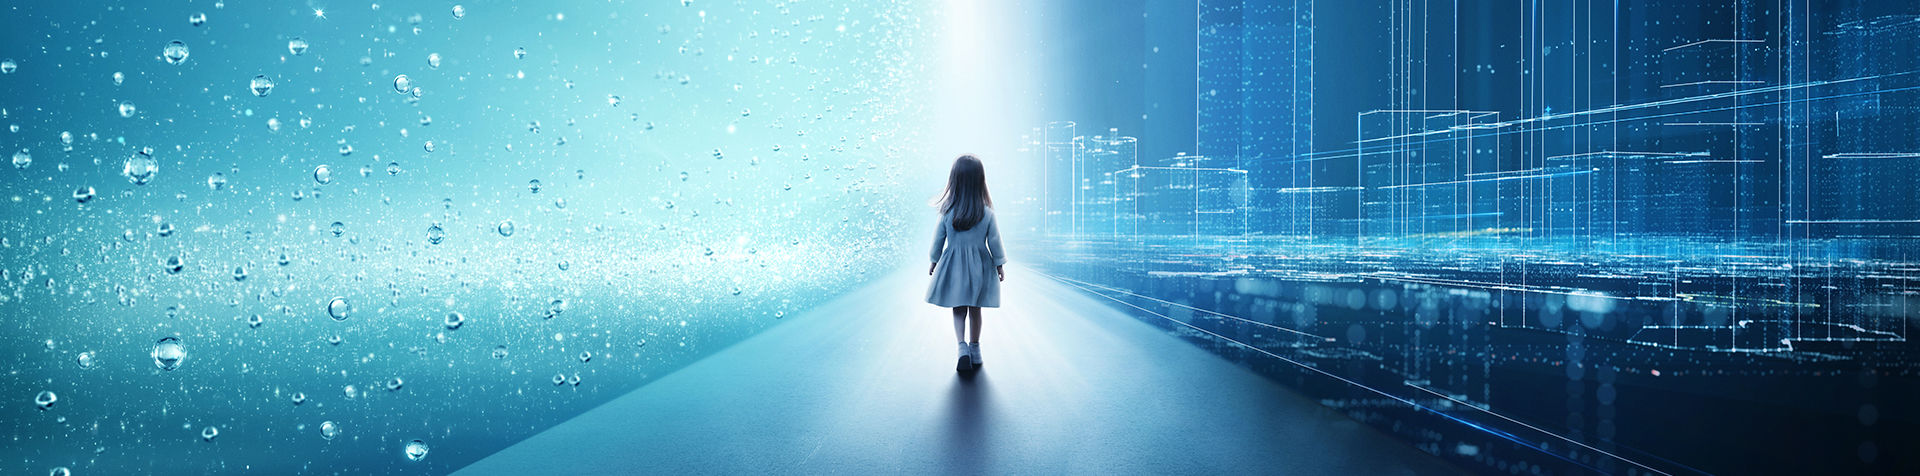 A girl standing in the center of the road with the background of waterdrops and buildings.